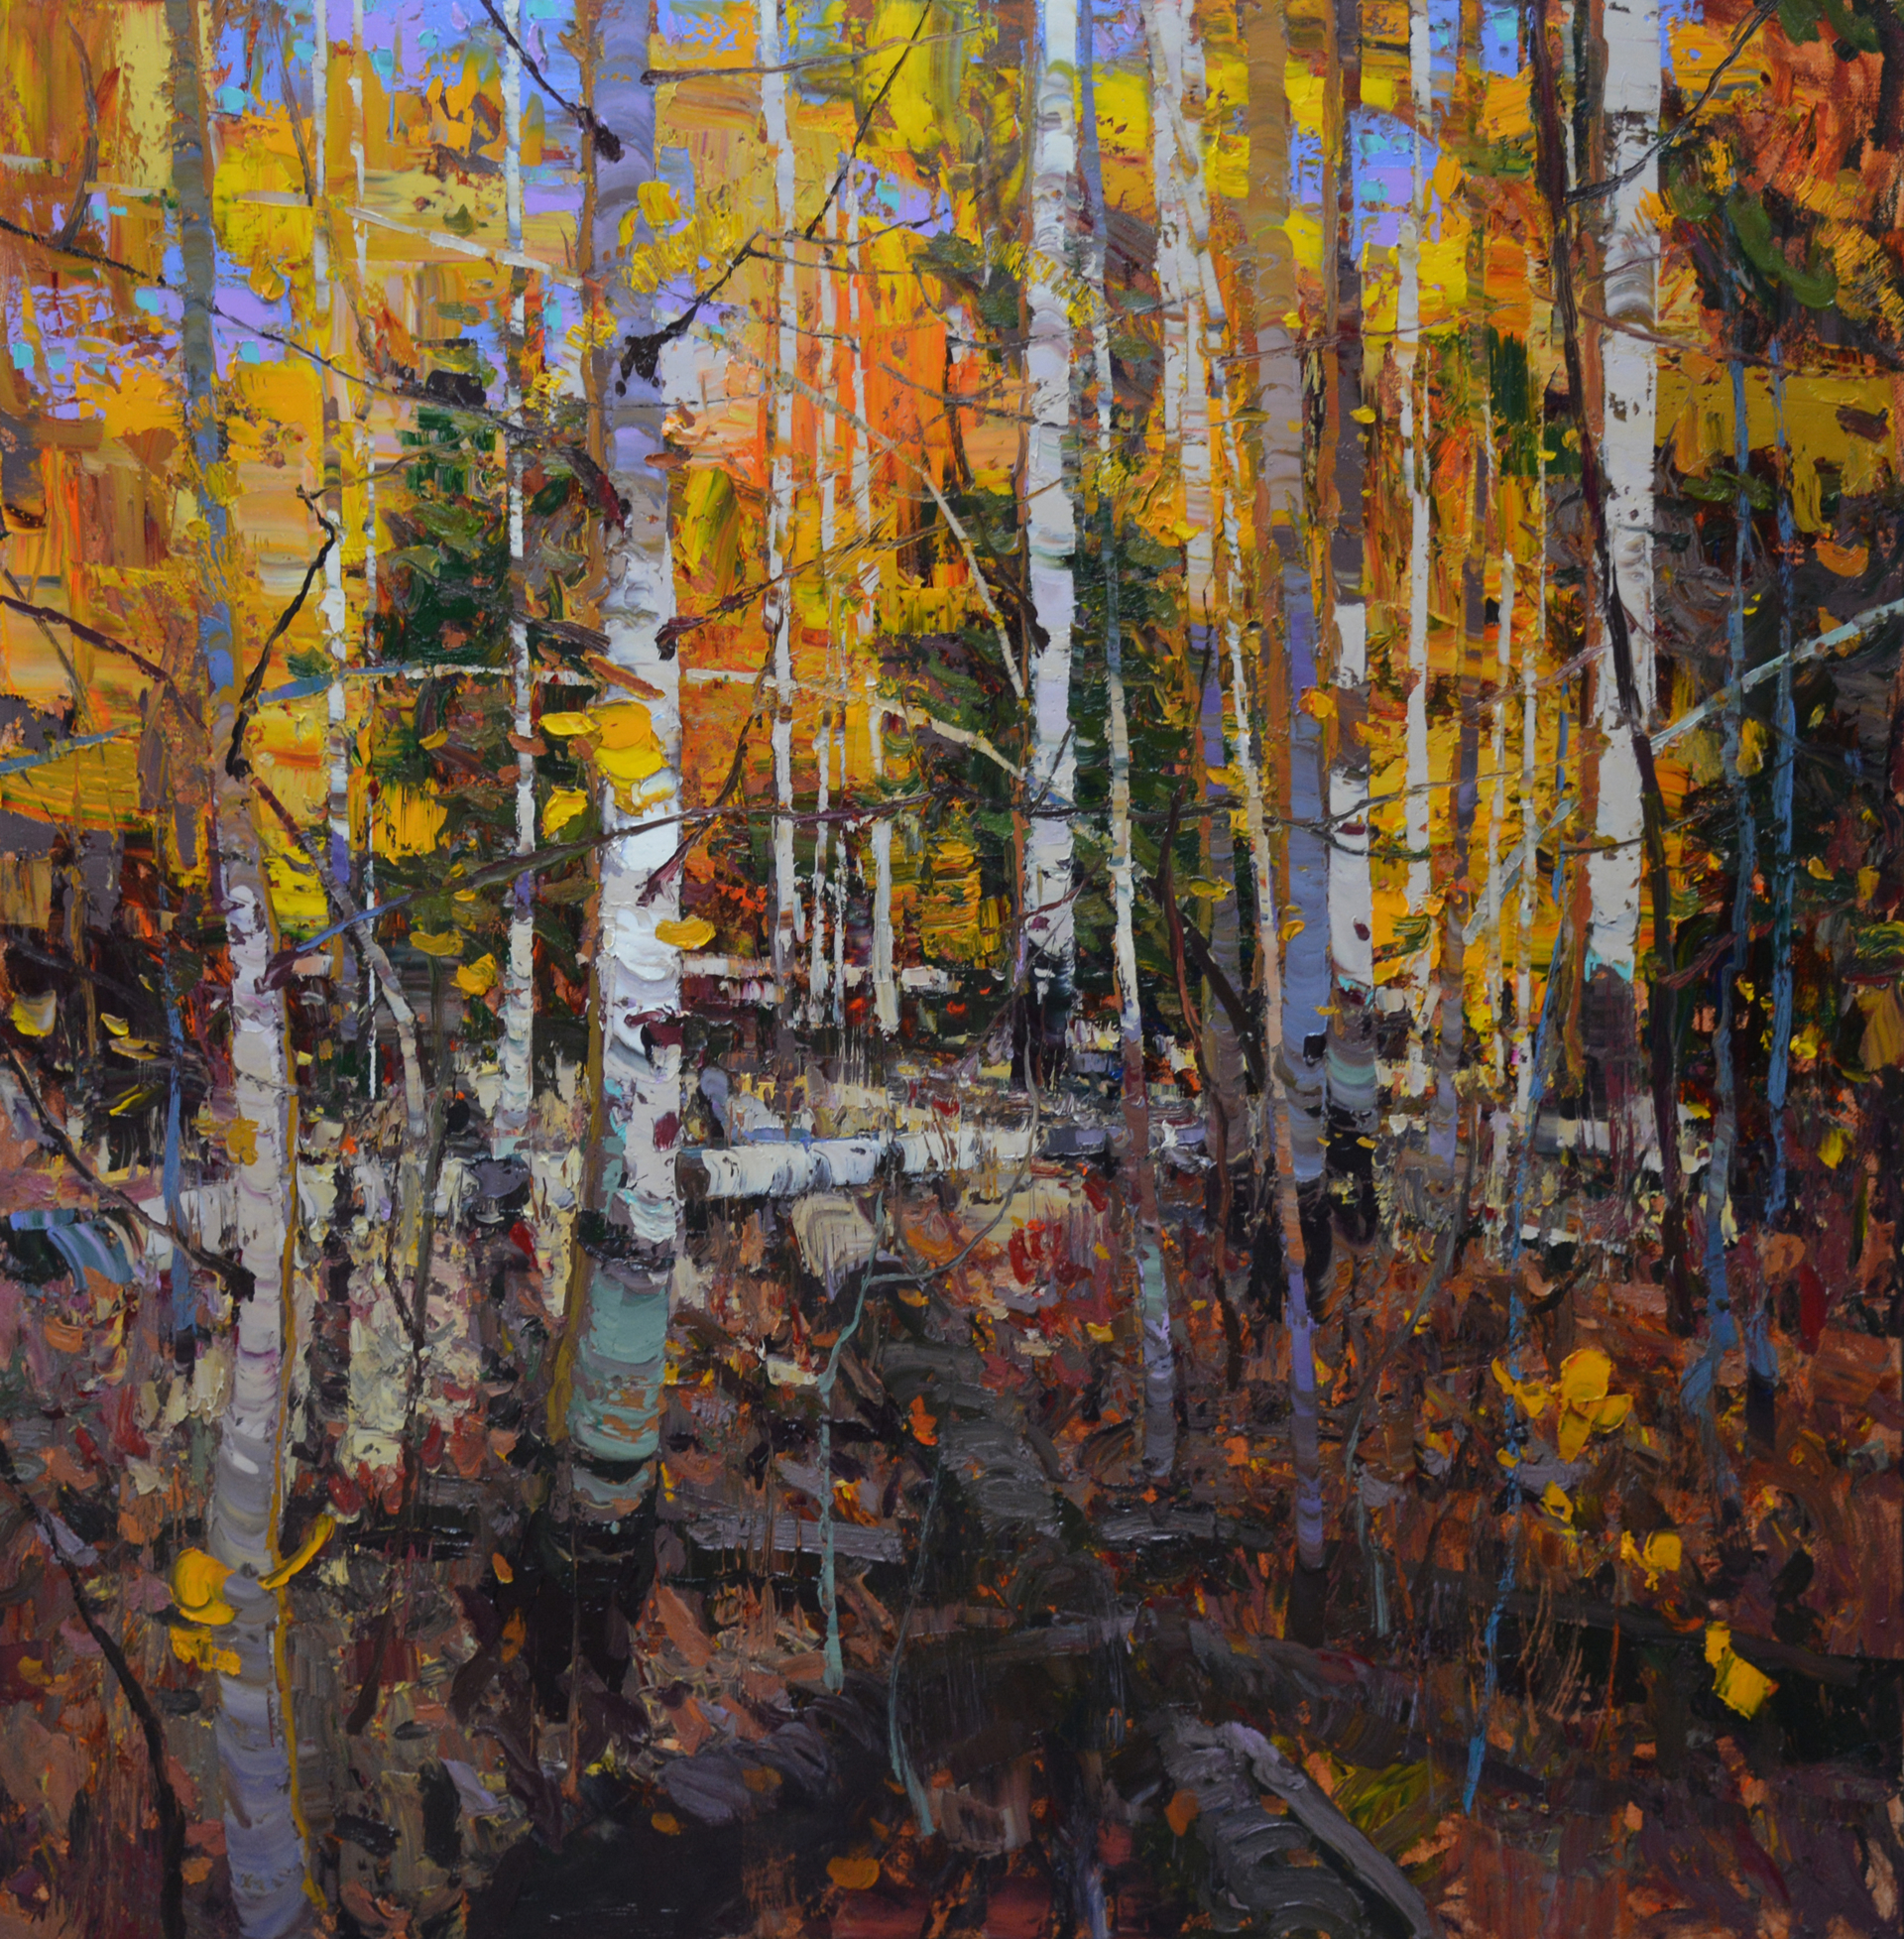 A Contemporary Fine Art Oil Painting By Silas Thompson Featuring A Rocky Mountain Forest In Fall, Available At Gallery Wild